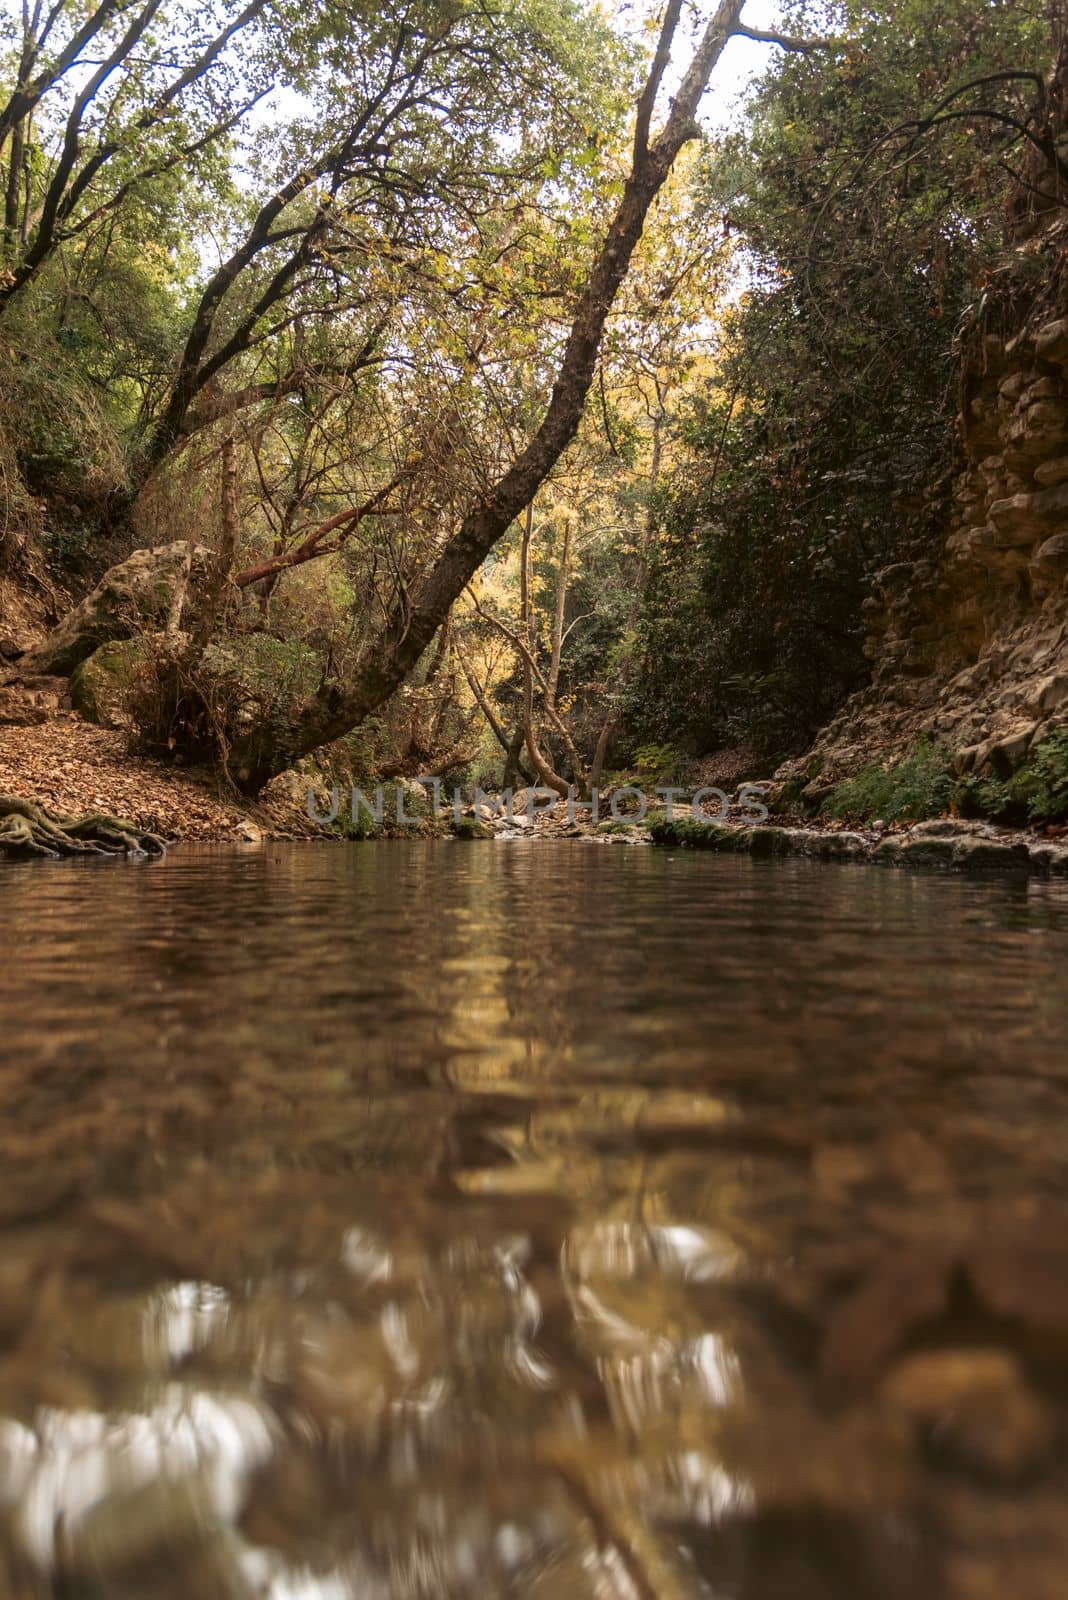 View of Kziv Stream at the end of the Black marked trail, Montfort Nahal Kziv National park, Western Galilee, Northern District of Israel, Israel. High quality photo